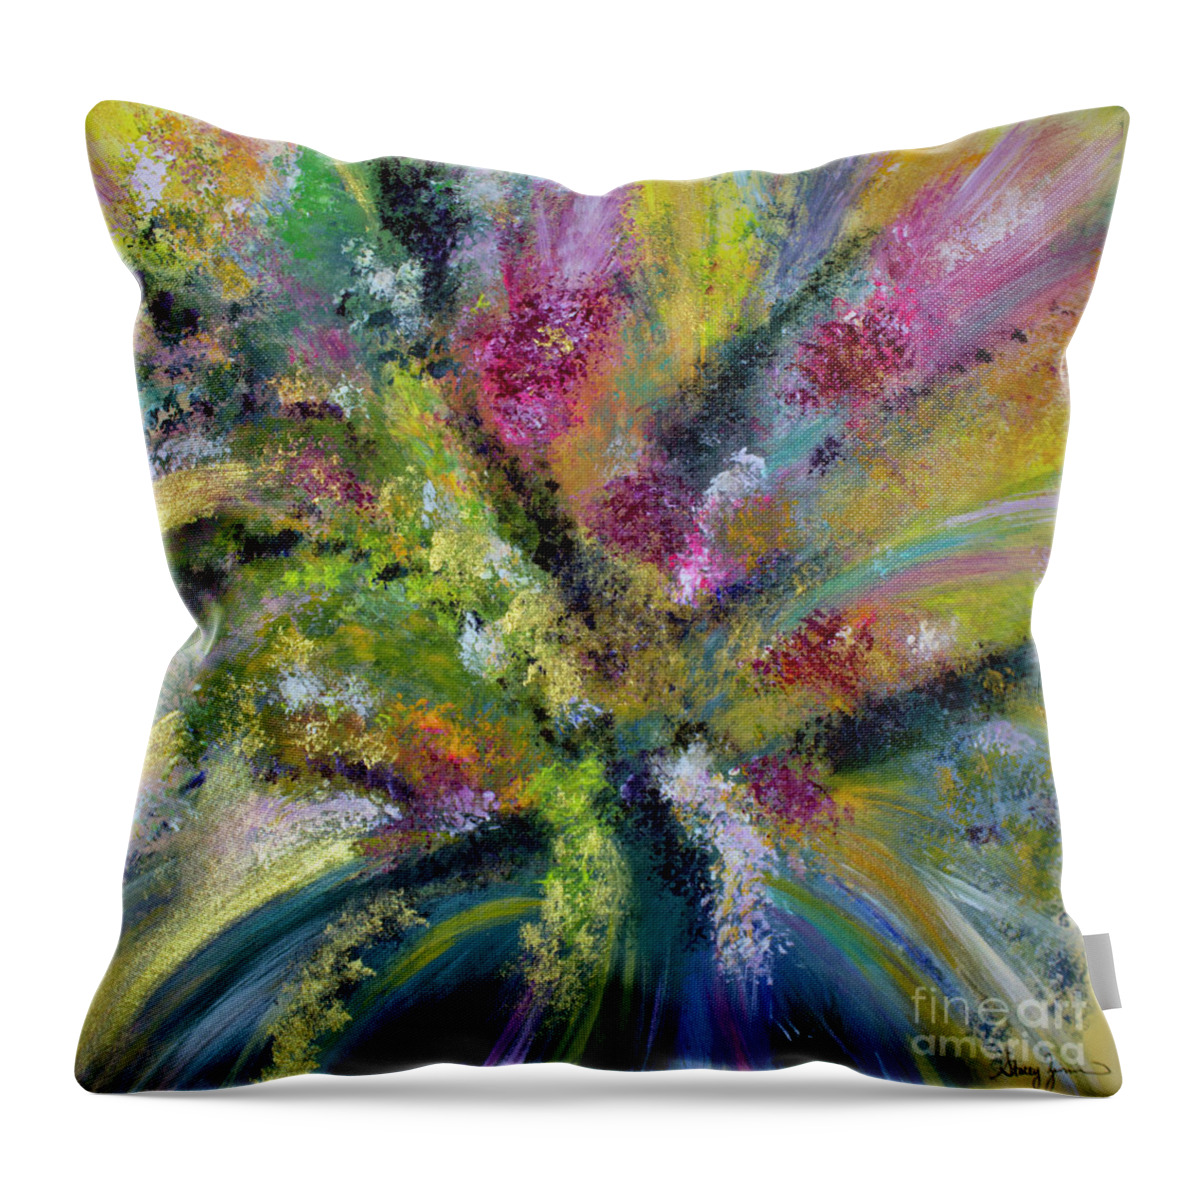 Floral Throw Pillow featuring the painting Emerge #1 by Stacey Zimmerman